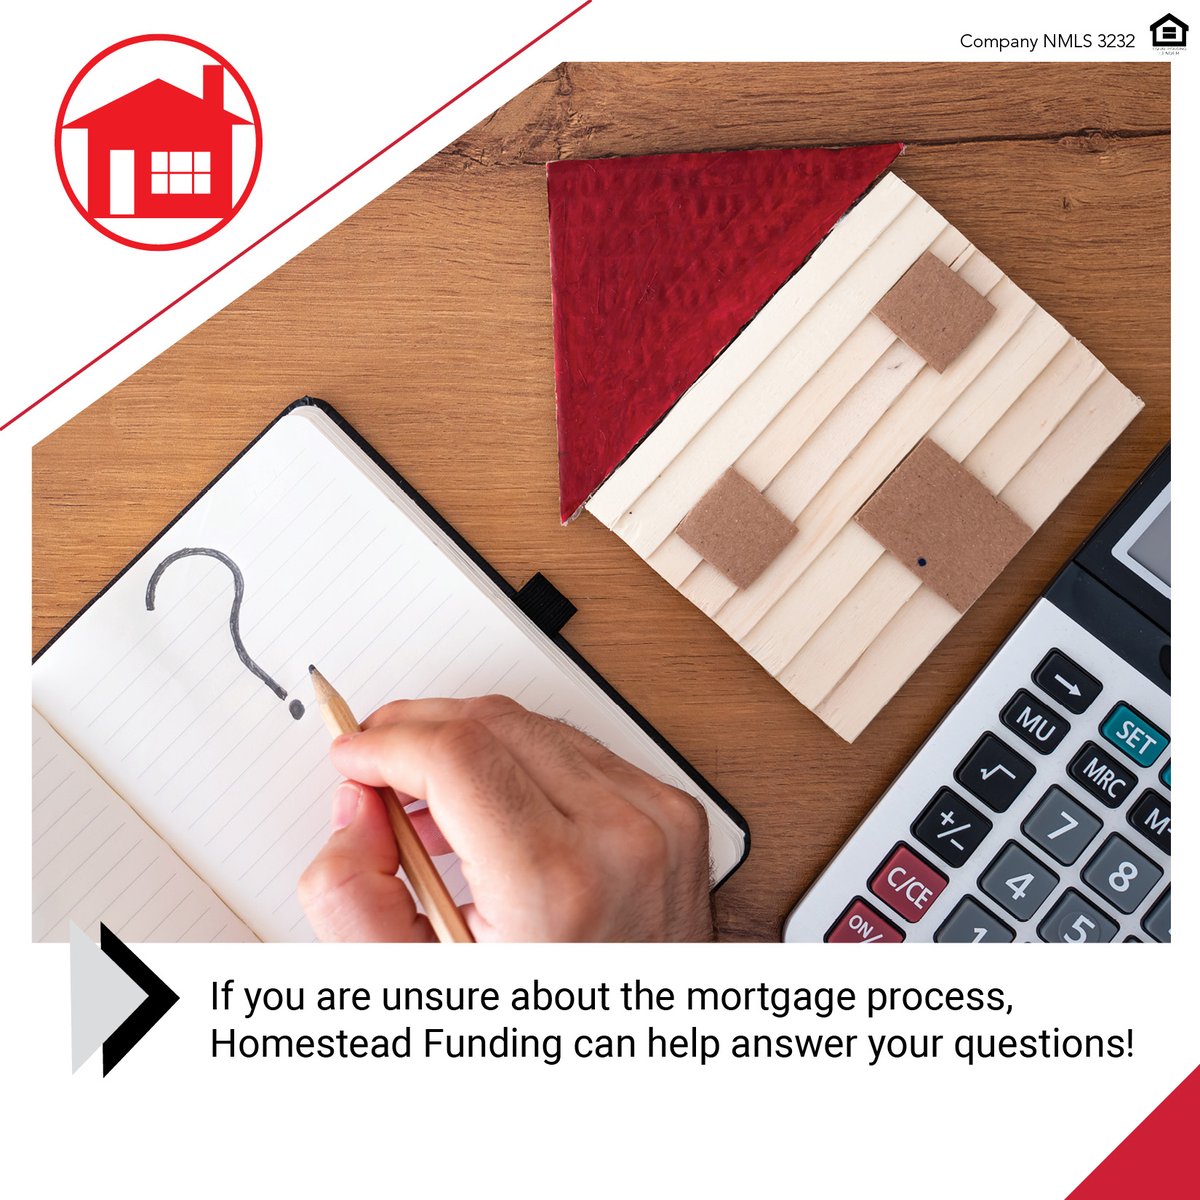 Call me today to have all your mortgage questions answered! #mortgageapplication #mortgageprocess #loanoriginators #purchase #refinance #mortgage #homeloan #homeownership #locallender